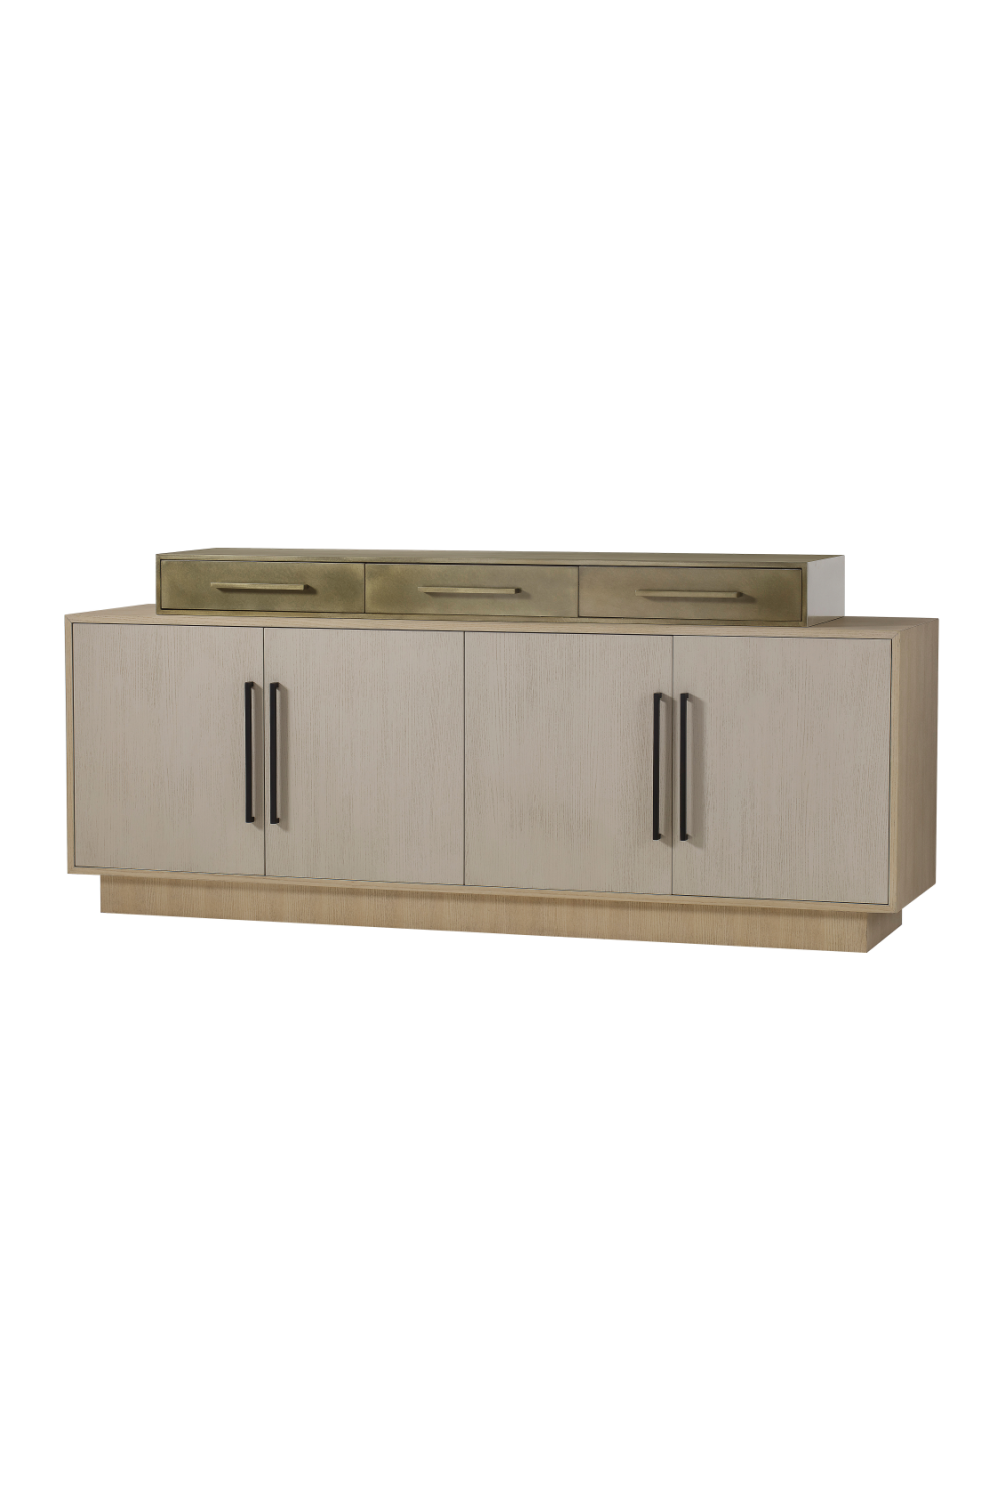 Two-Toned Ash Four Door Sideboard | Andrew Martin Louis | OROA